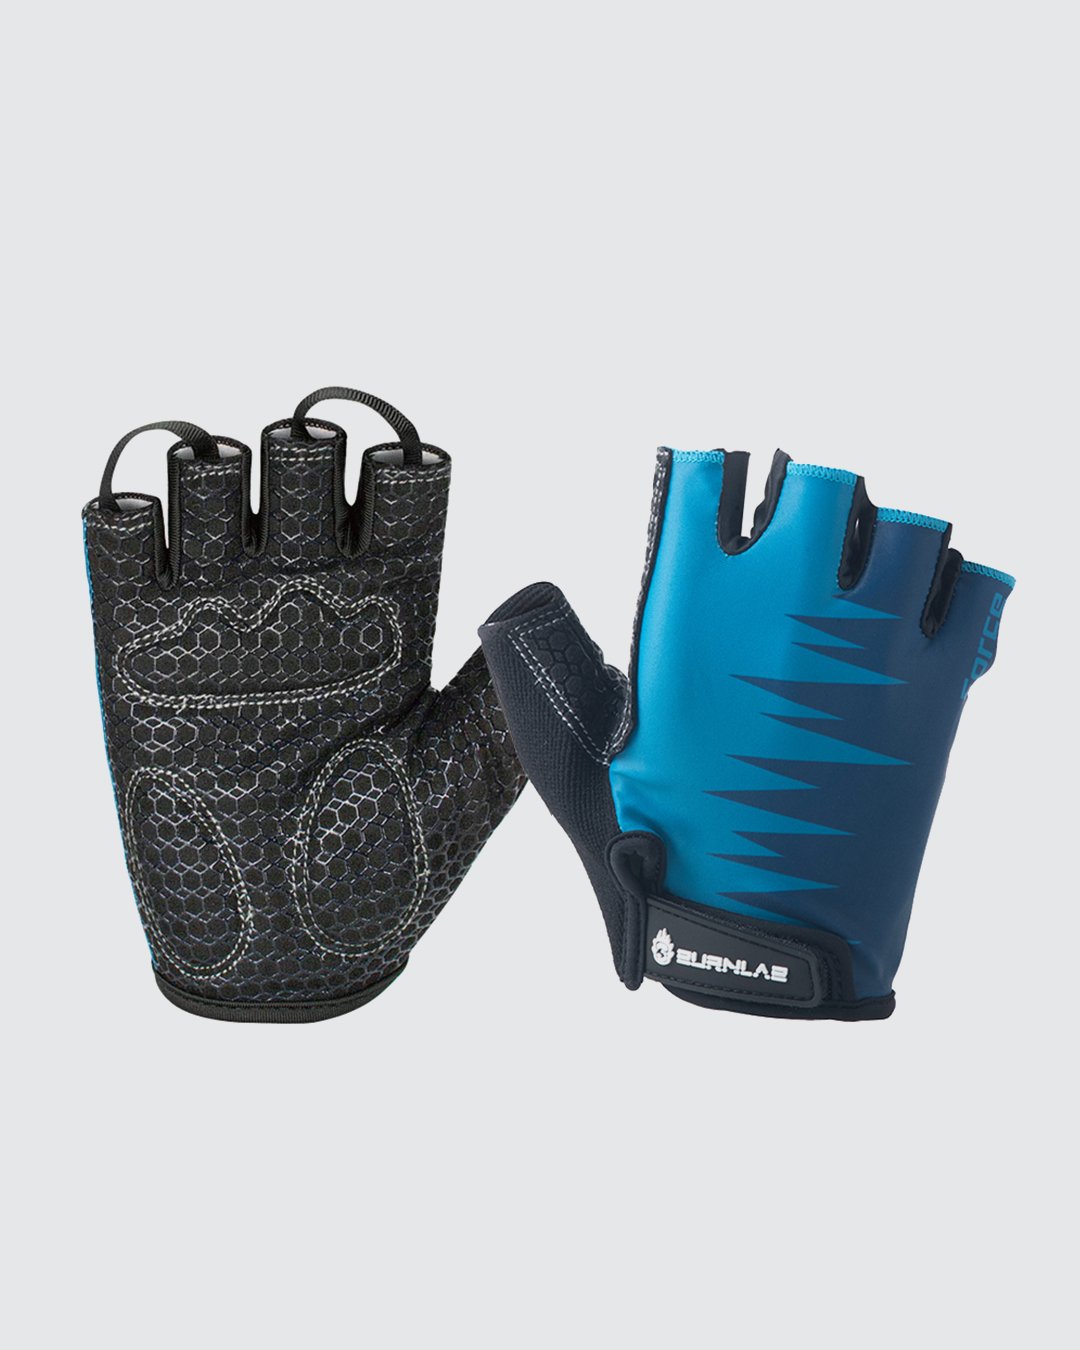 RYMNT Full Fingers Workout Gloves for Women Men-Gym Gloves for Women Weight  Lifting, Exercise Crossfit Gloves-Touch Screen-Extra Grip  Foam-Padded,Anti-Slip for Fitness,Training,Cycling. price in UAE,   UAE